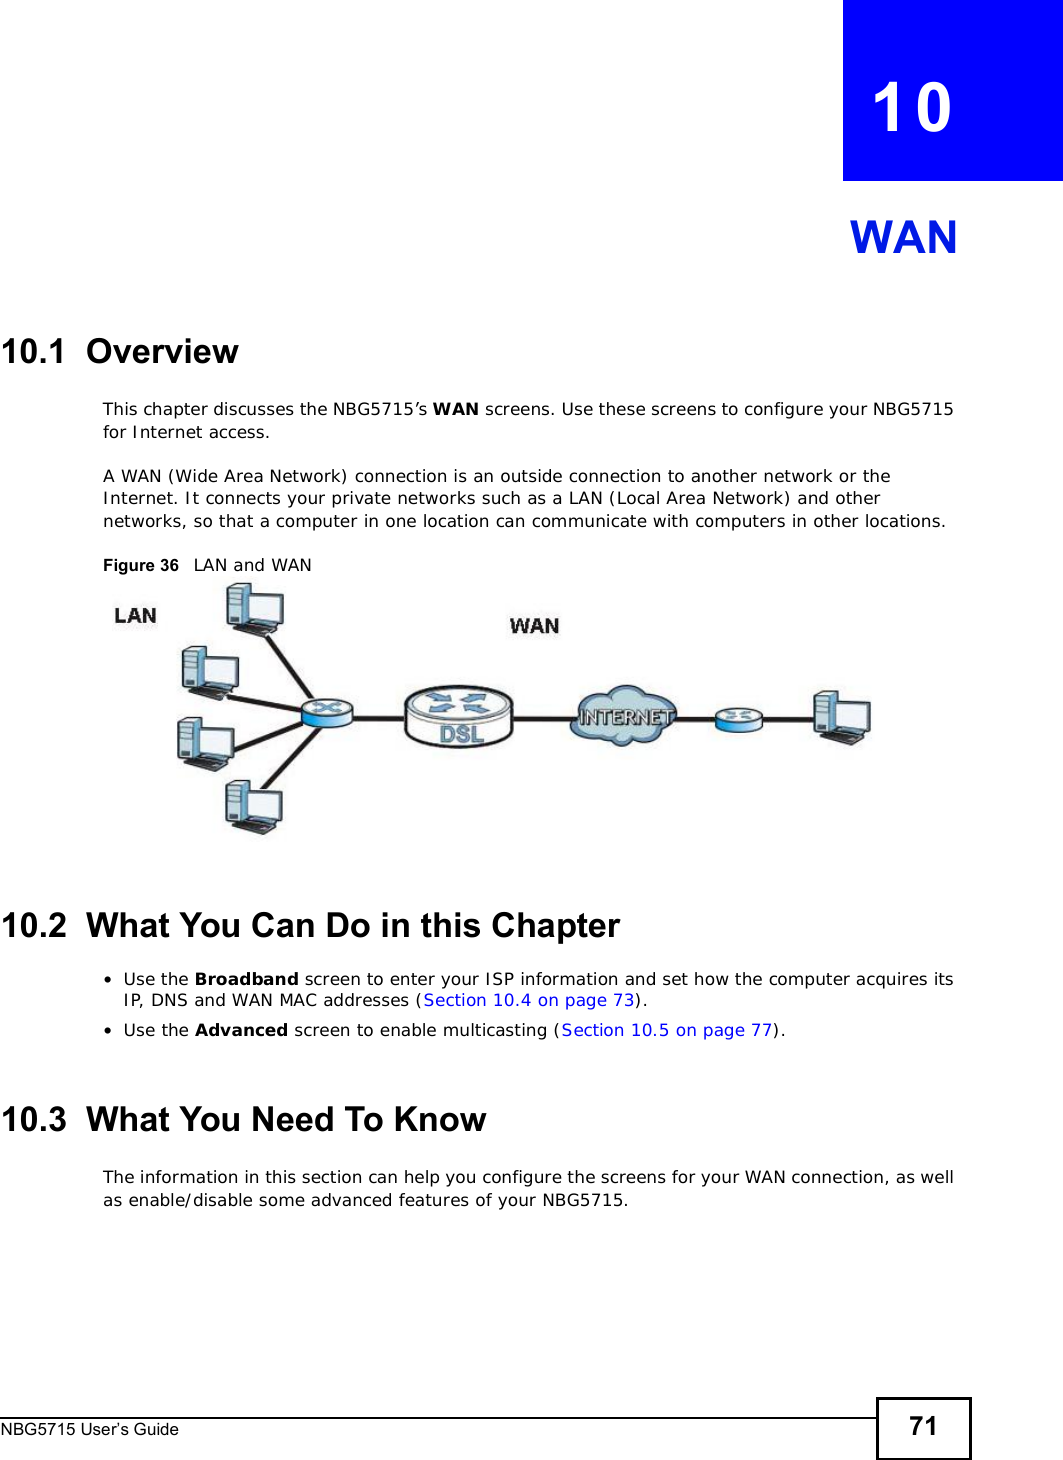 NBG5715 User’s Guide 71CHAPTER   10WAN10.1  OverviewThis chapter discusses the NBG5715’s WAN screens. Use these screens to configure your NBG5715 for Internet access.A WAN (Wide Area Network) connection is an outside connection to another network or the Internet. It connects your private networks such as a LAN (Local Area Network) and other networks, so that a computer in one location can communicate with computers in other locations.Figure 36   LAN and WAN10.2  What You Can Do in this Chapter•Use the Broadband screen to enter your ISP information and set how the computer acquires its IP, DNS and WAN MAC addresses (Section 10.4 on page 73).•Use the Advanced screen to enable multicasting (Section 10.5 on page 77).10.3  What You Need To KnowThe information in this section can help you configure the screens for your WAN connection, as well as enable/disable some advanced features of your NBG5715.